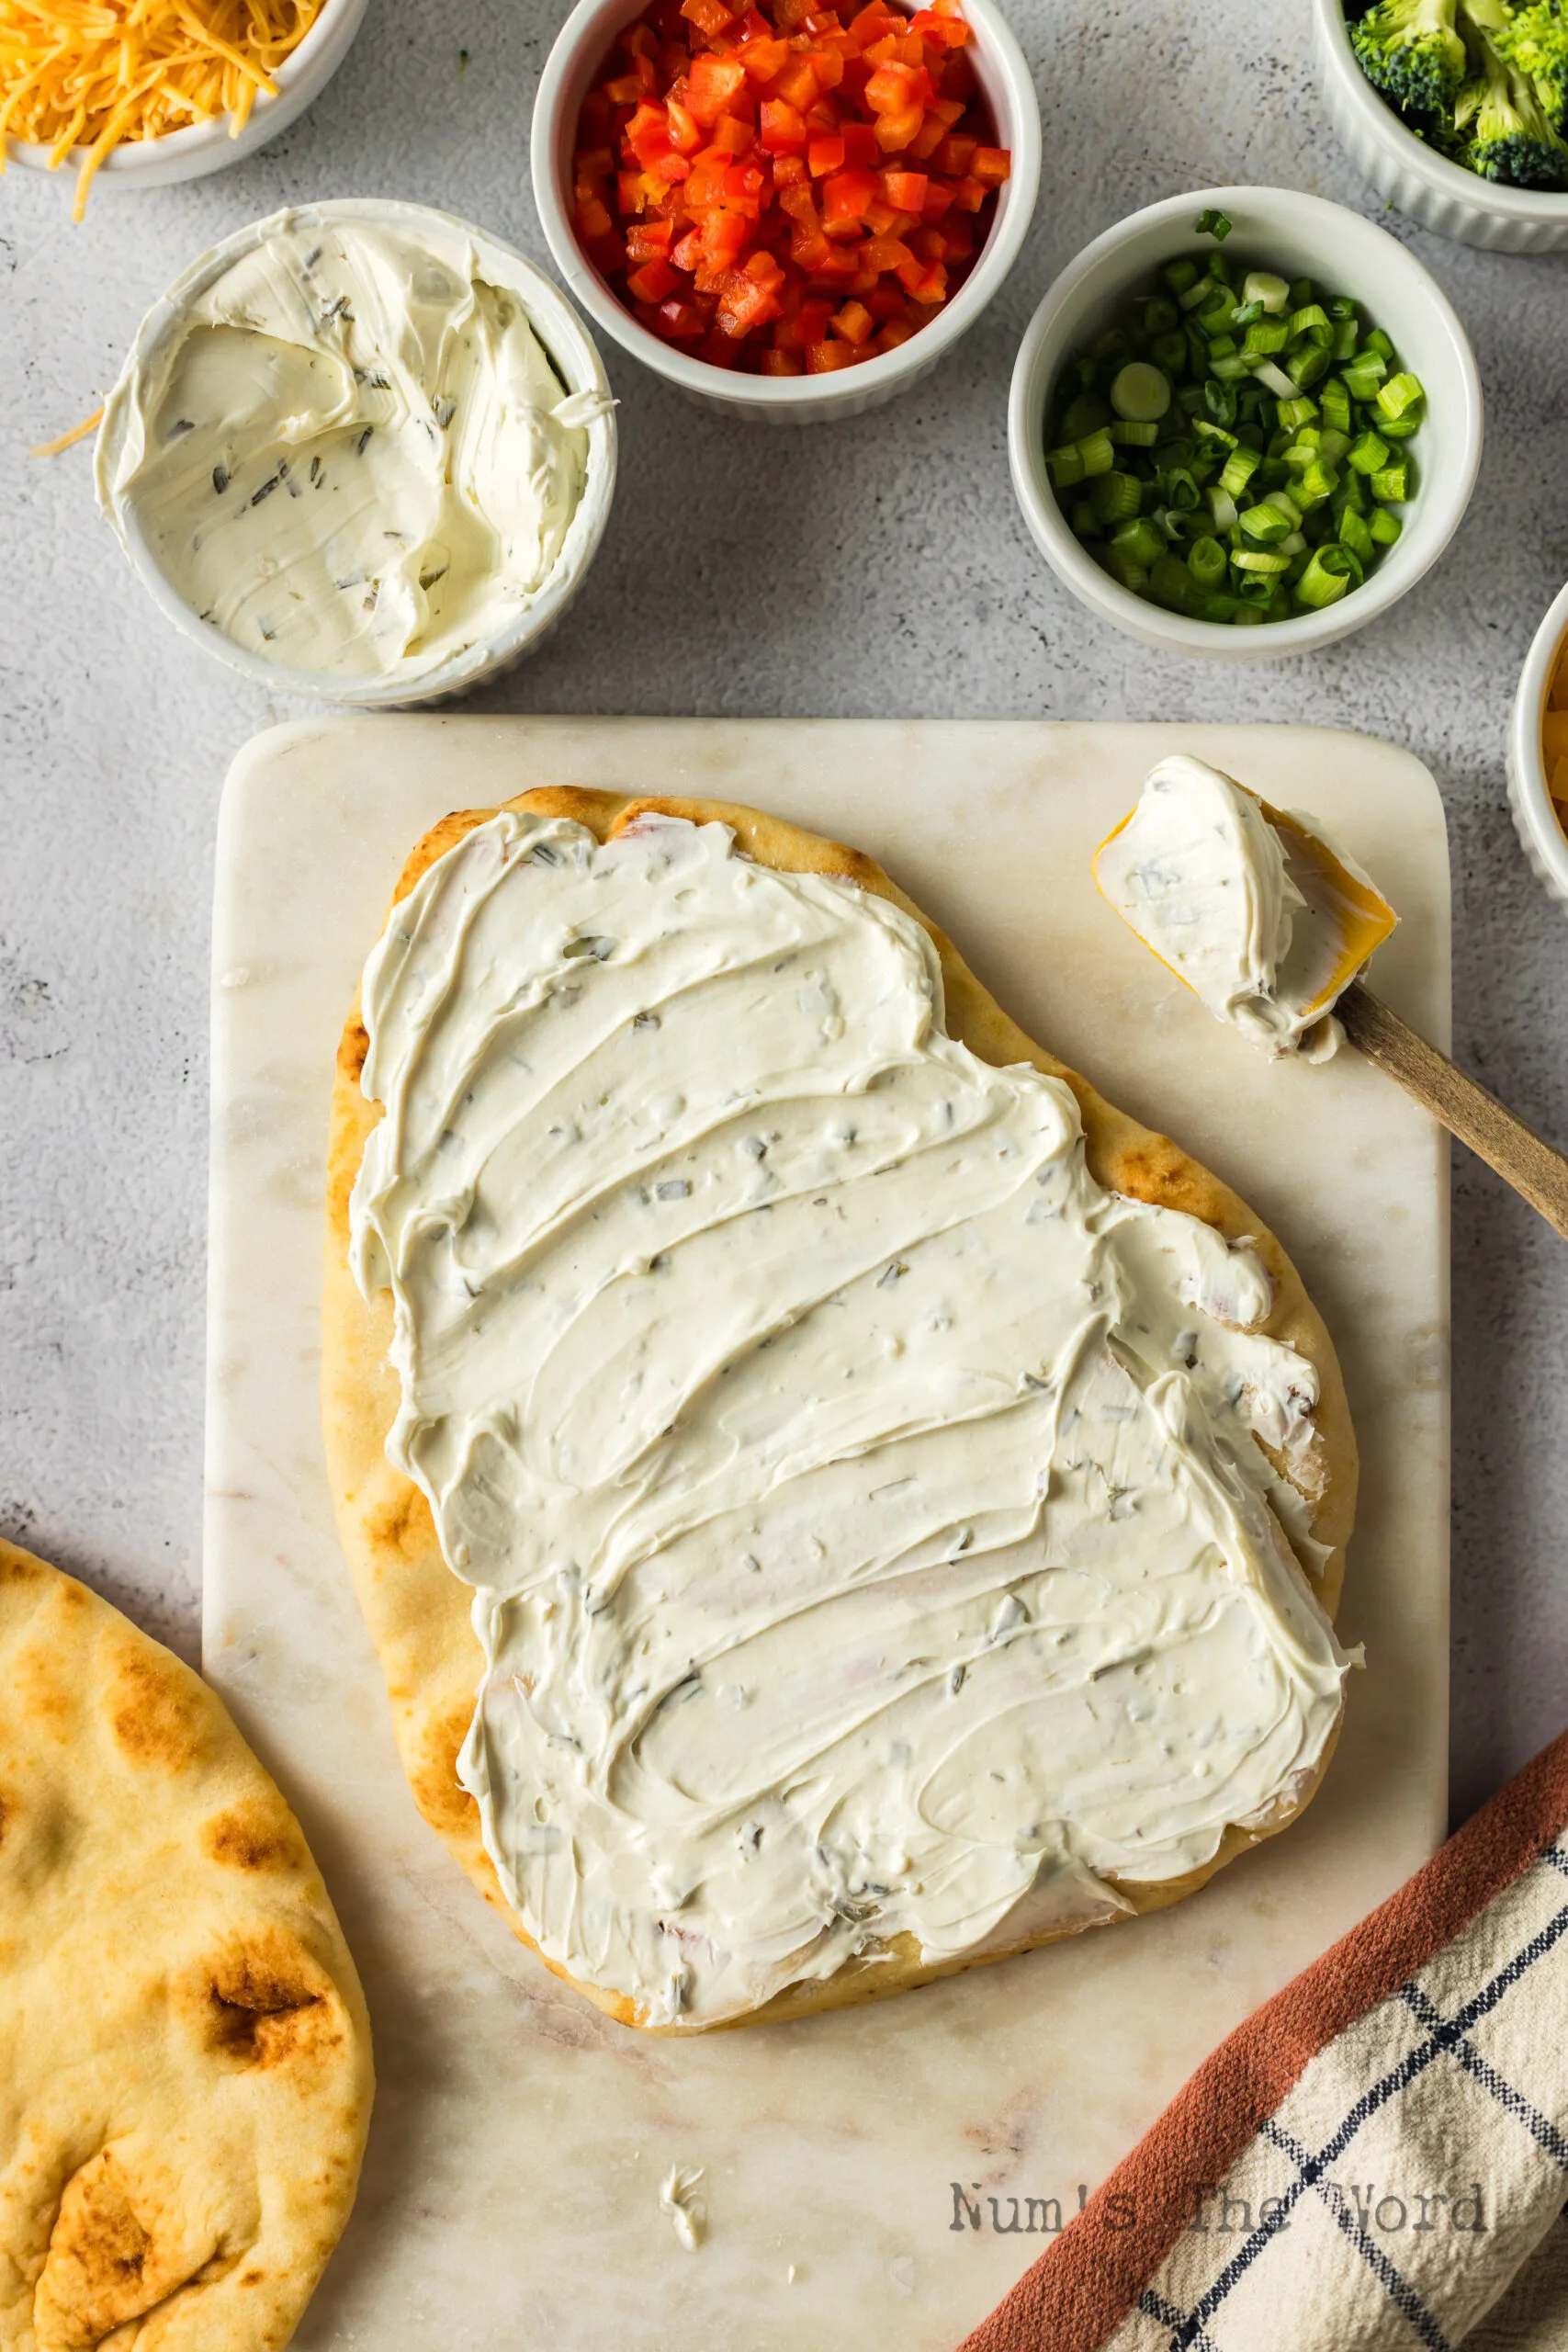 cream cheese spread out over a piece of naan bread